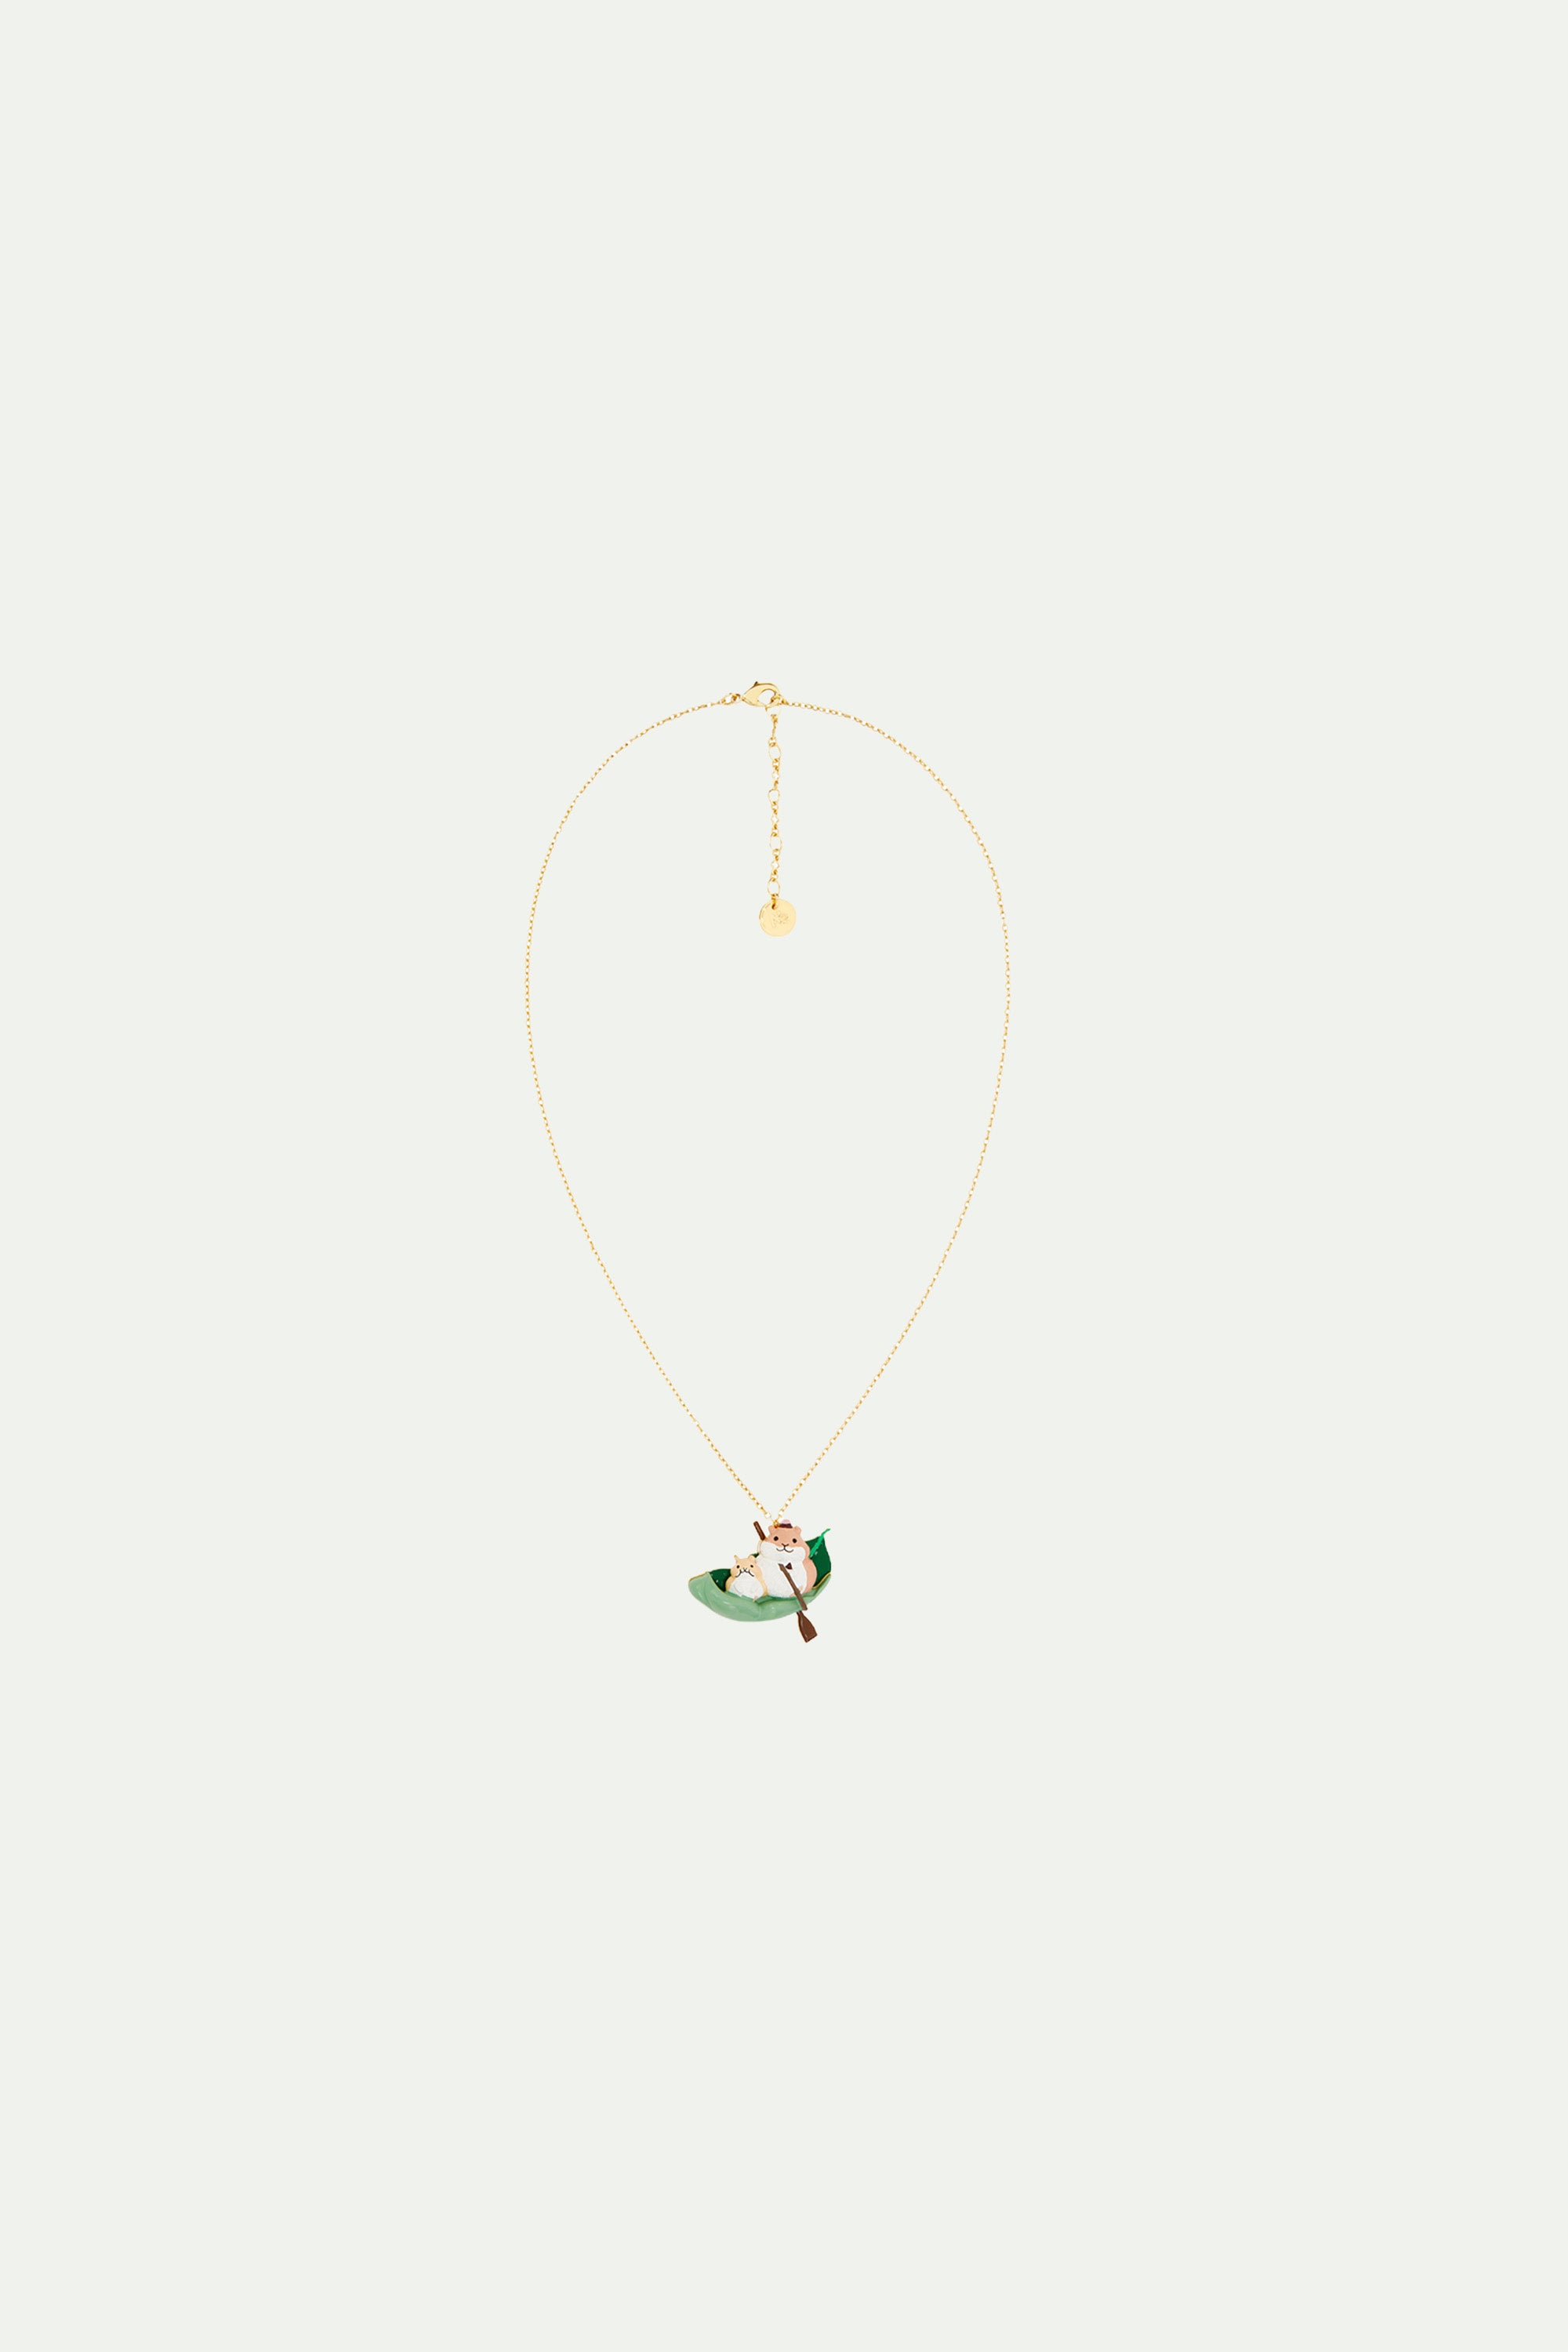 Exploring hamsters pendant necklace